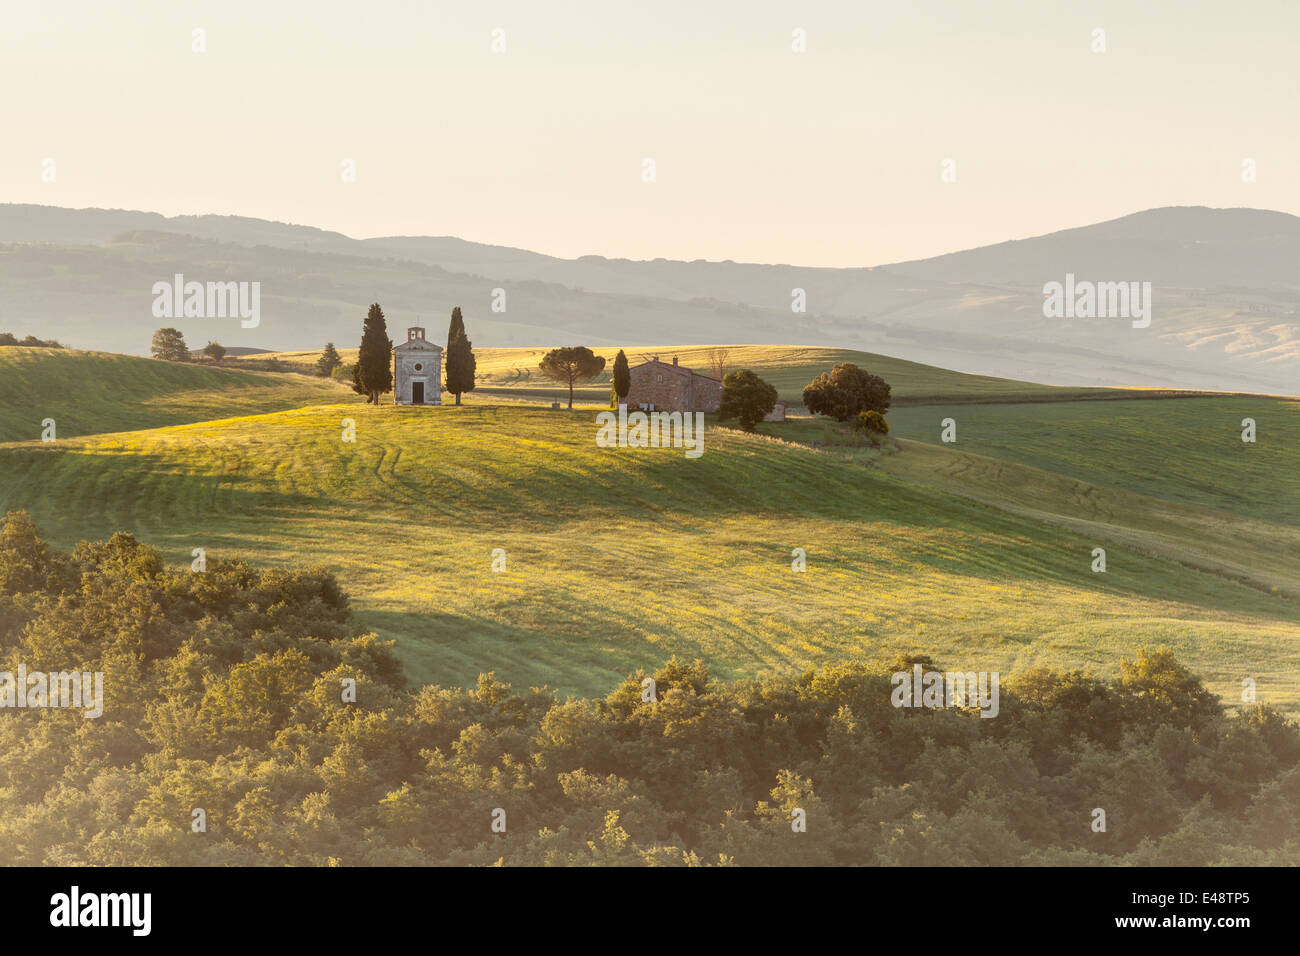 Vitaleta chapel on the Val d'Orcia. The area has been protected by UNESCO as a World Heritage Site. Stock Photo